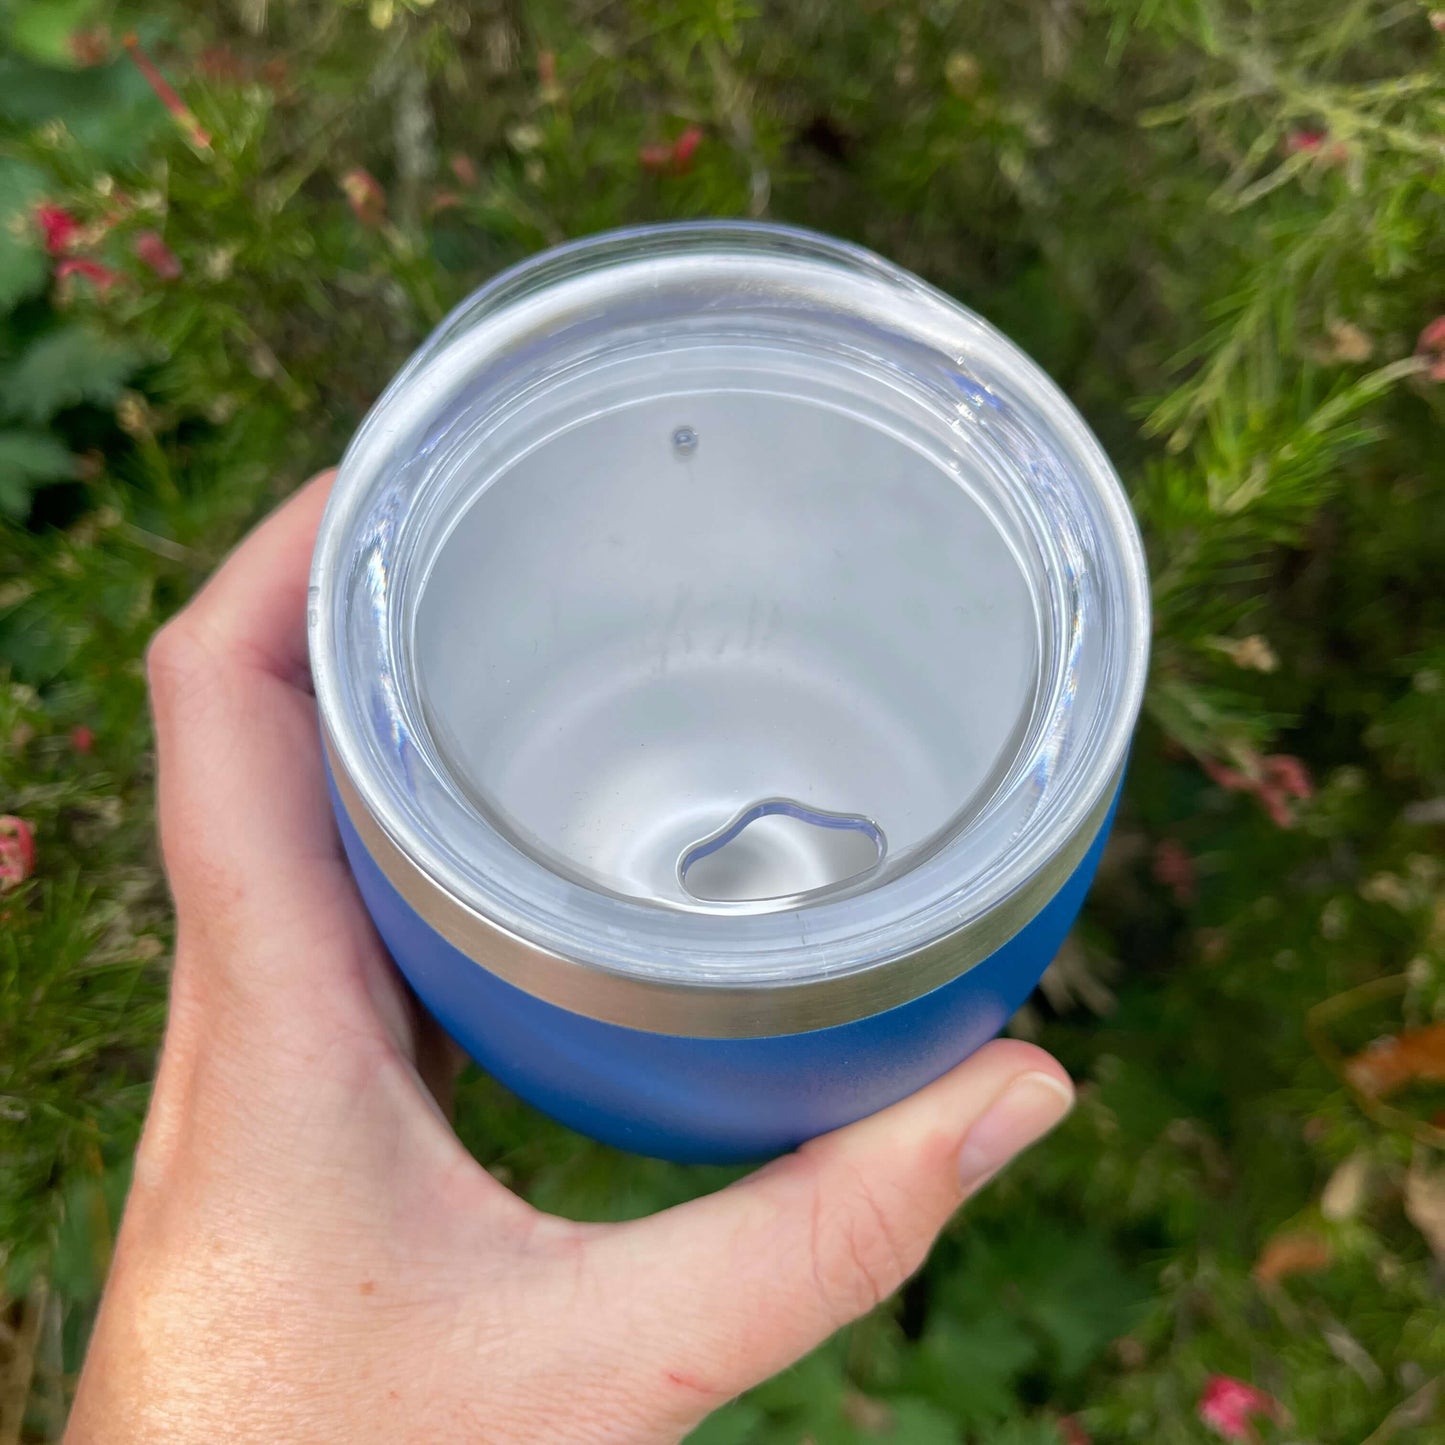  Birds eye view of a stainless coffee mug featuring the clear plastic sipper top.